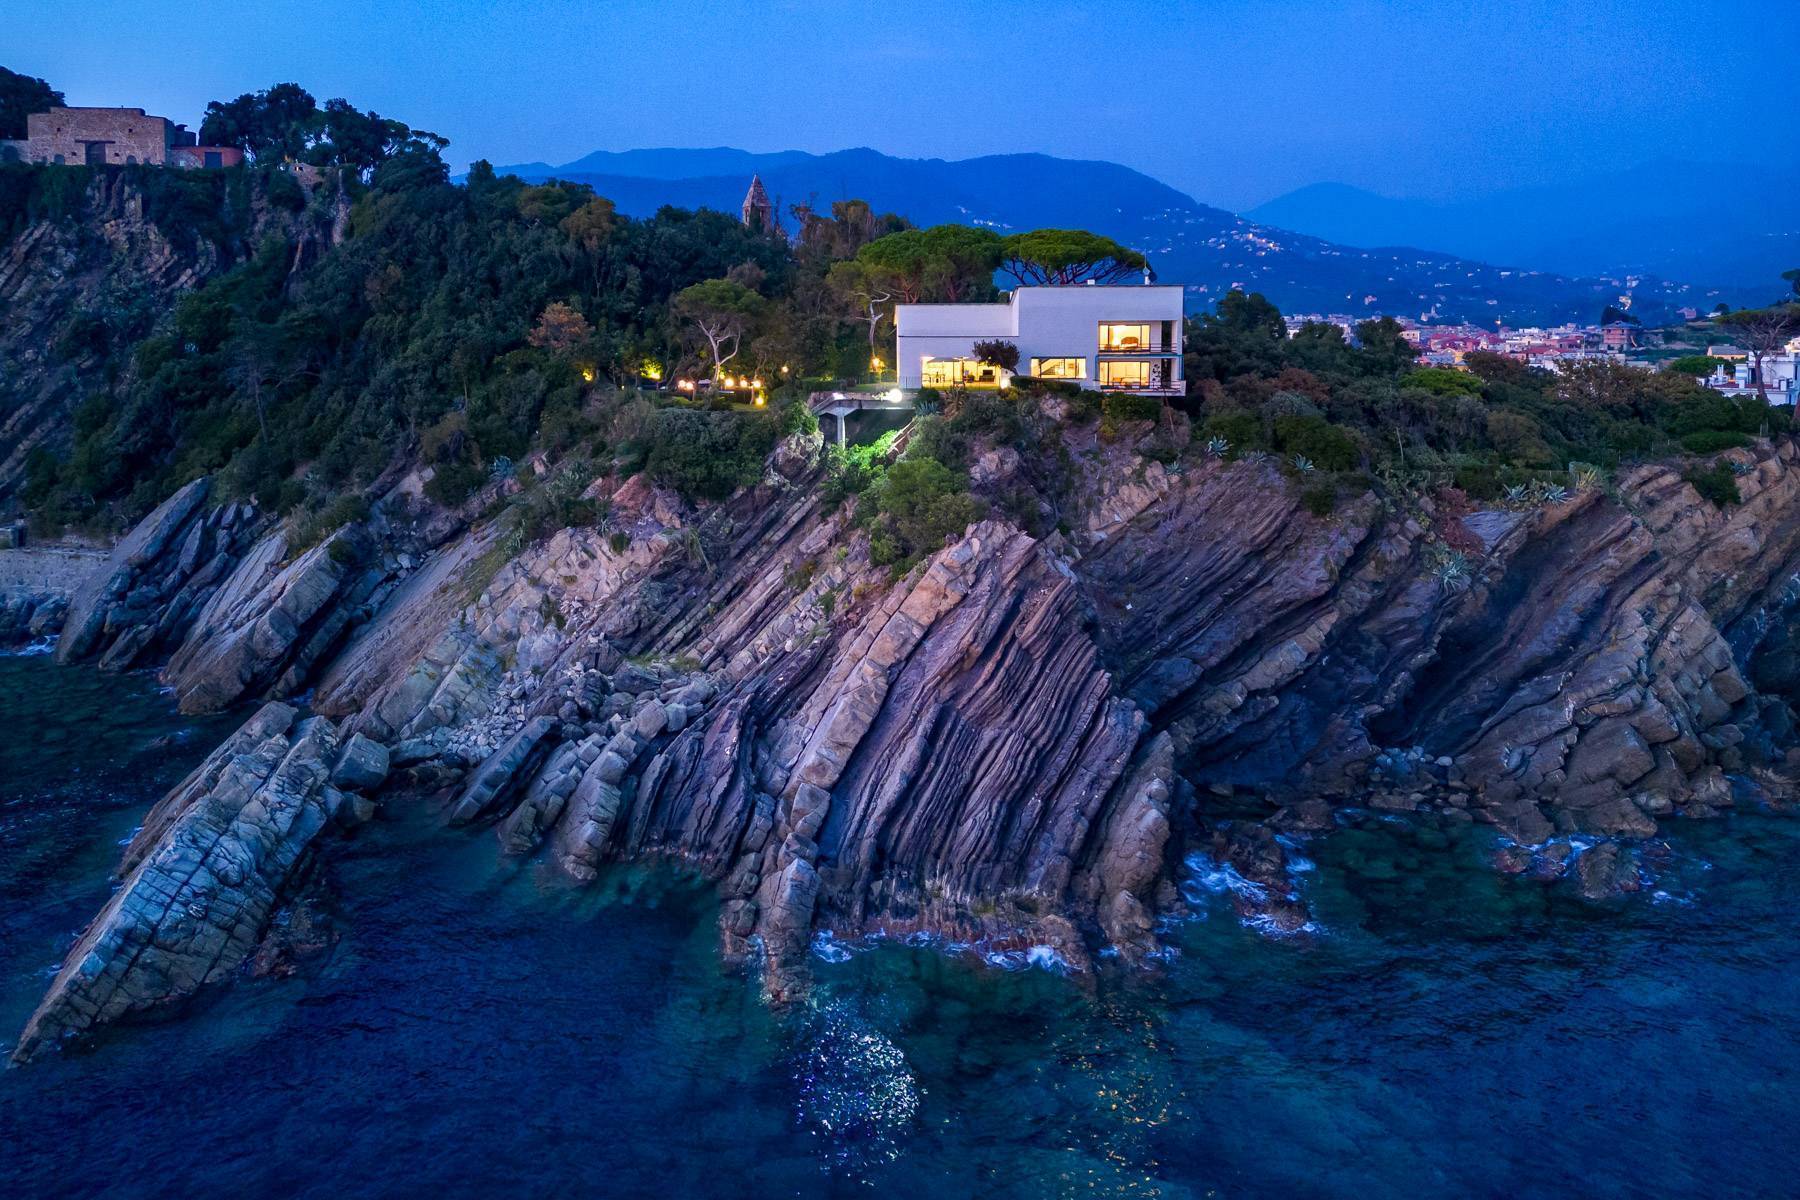 An architectural masterpiece overlooking the sea in Sestri Levante